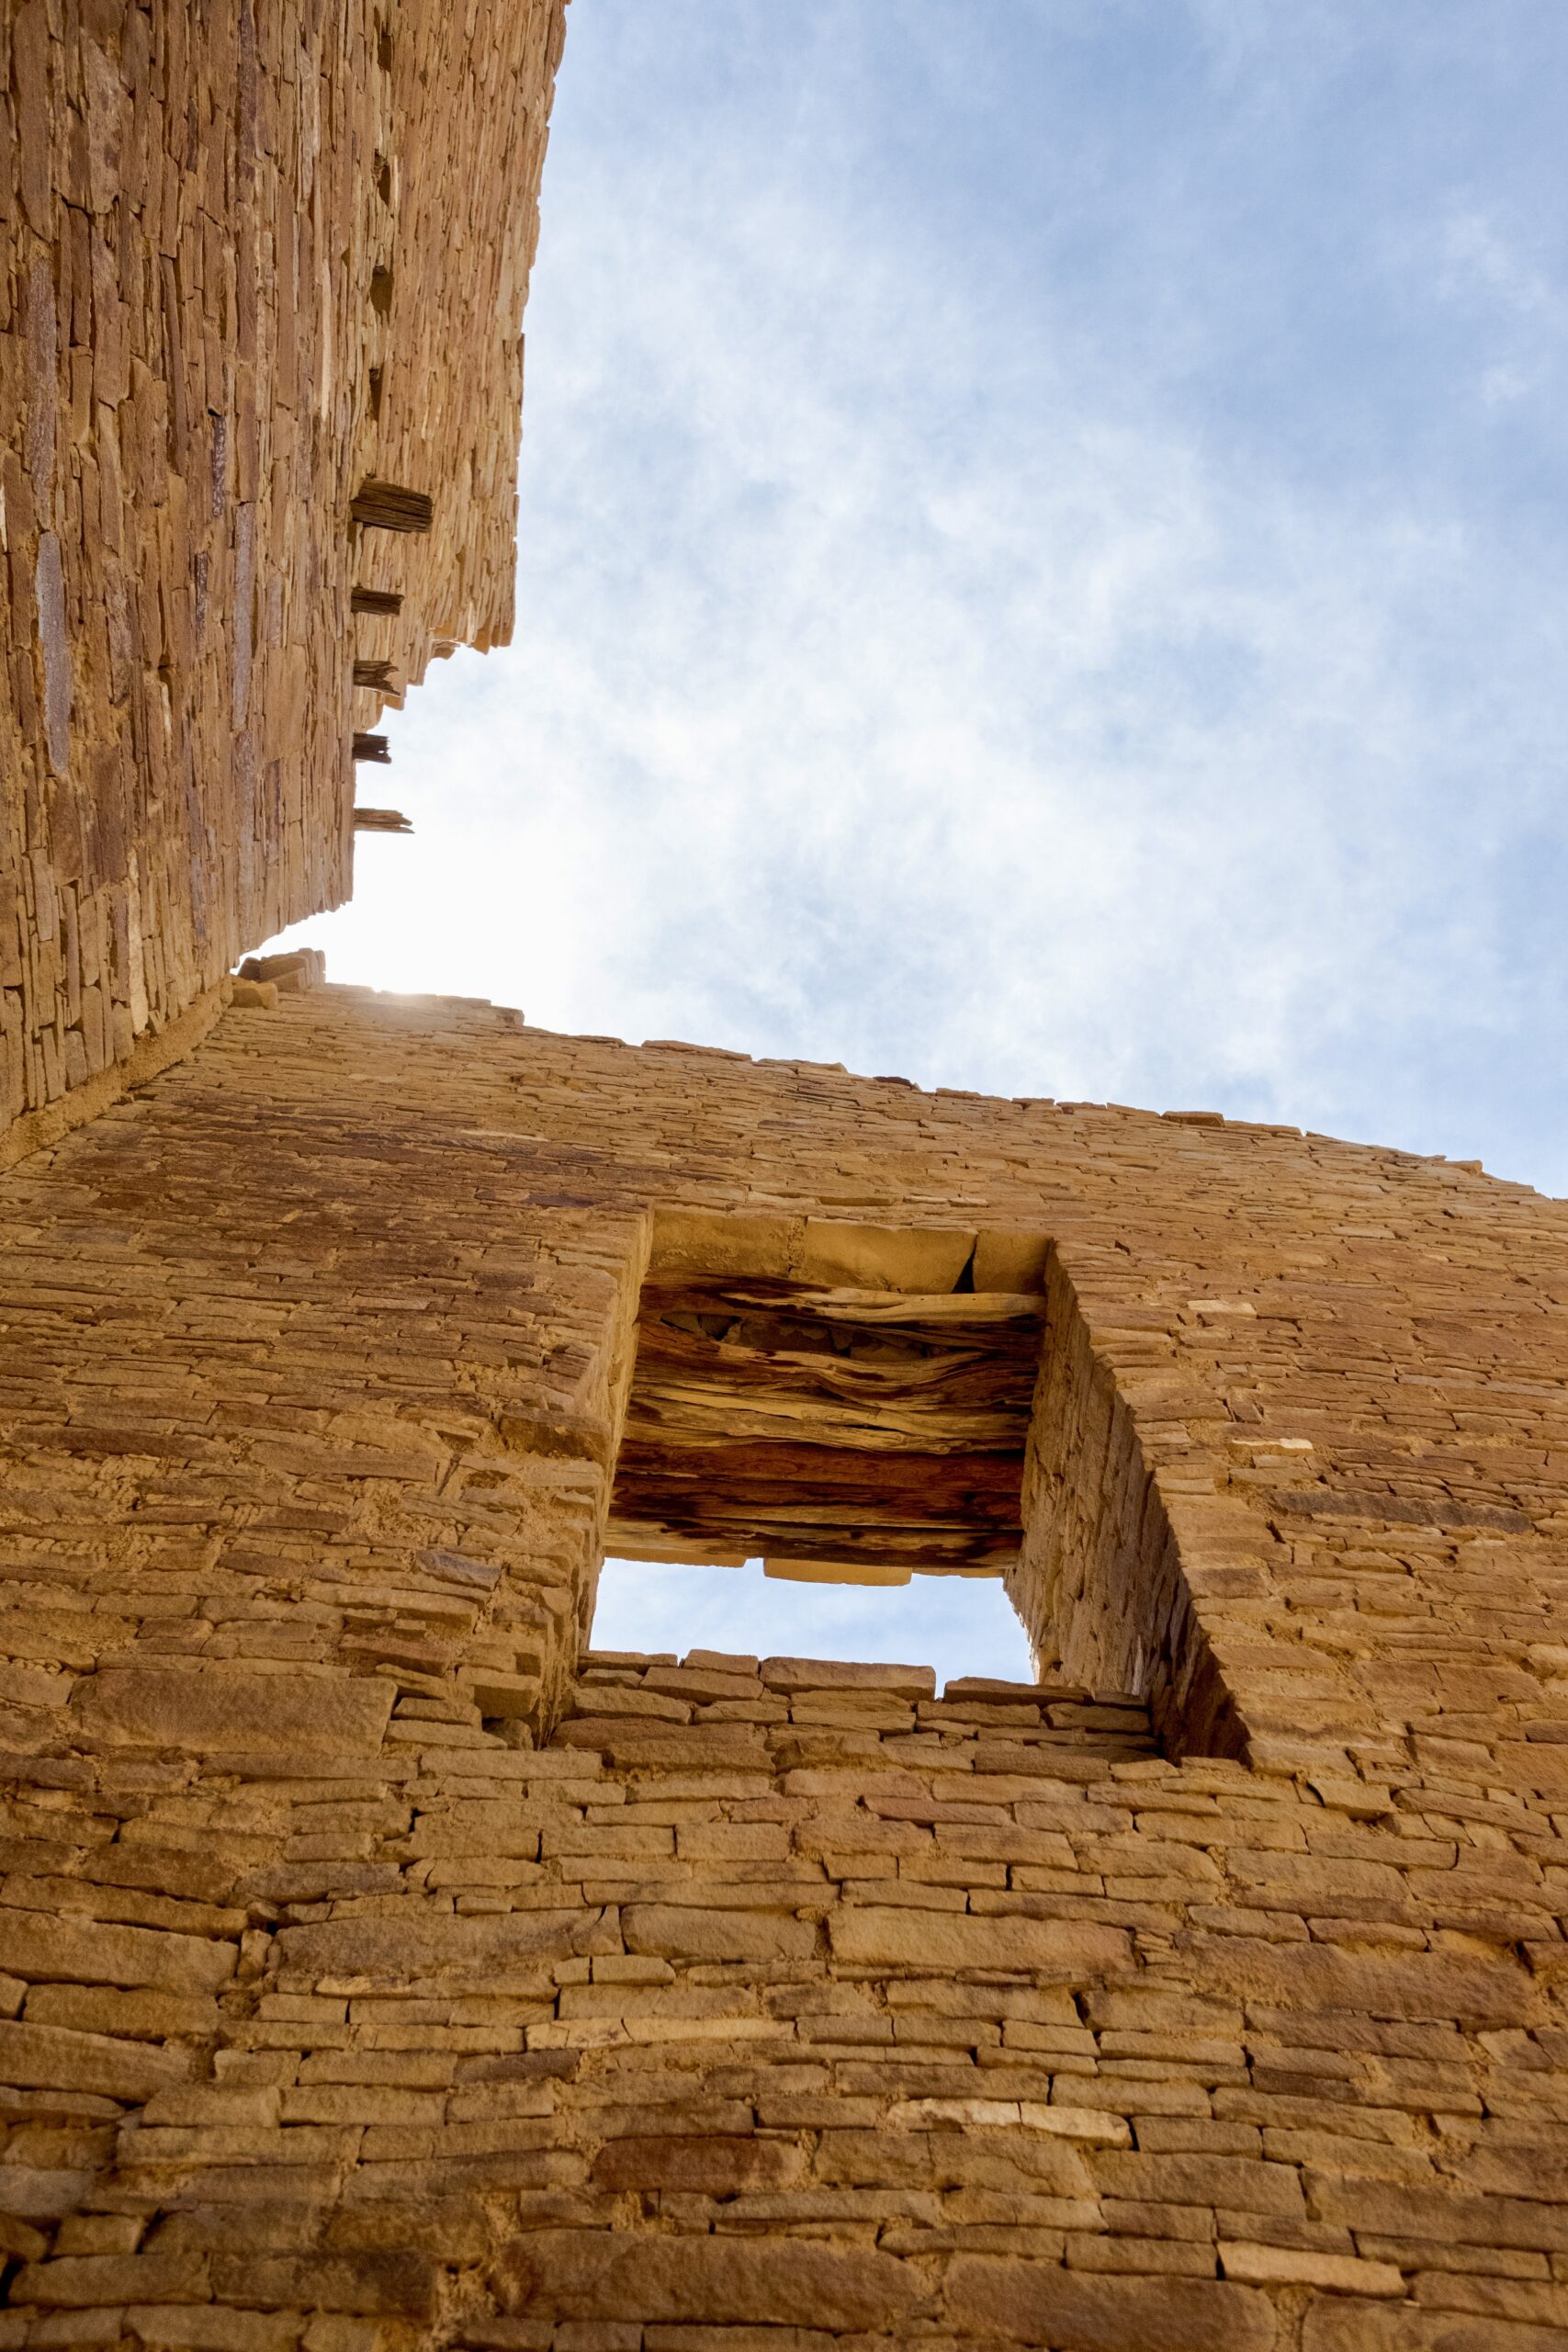 New Mexico Communities and Environmental Groups Applaud Biden Administration for Protecting Lands Surrounding Chaco Canyon From Oil and Gas Drilling, Await Permanent and Broader Protections for Landscape